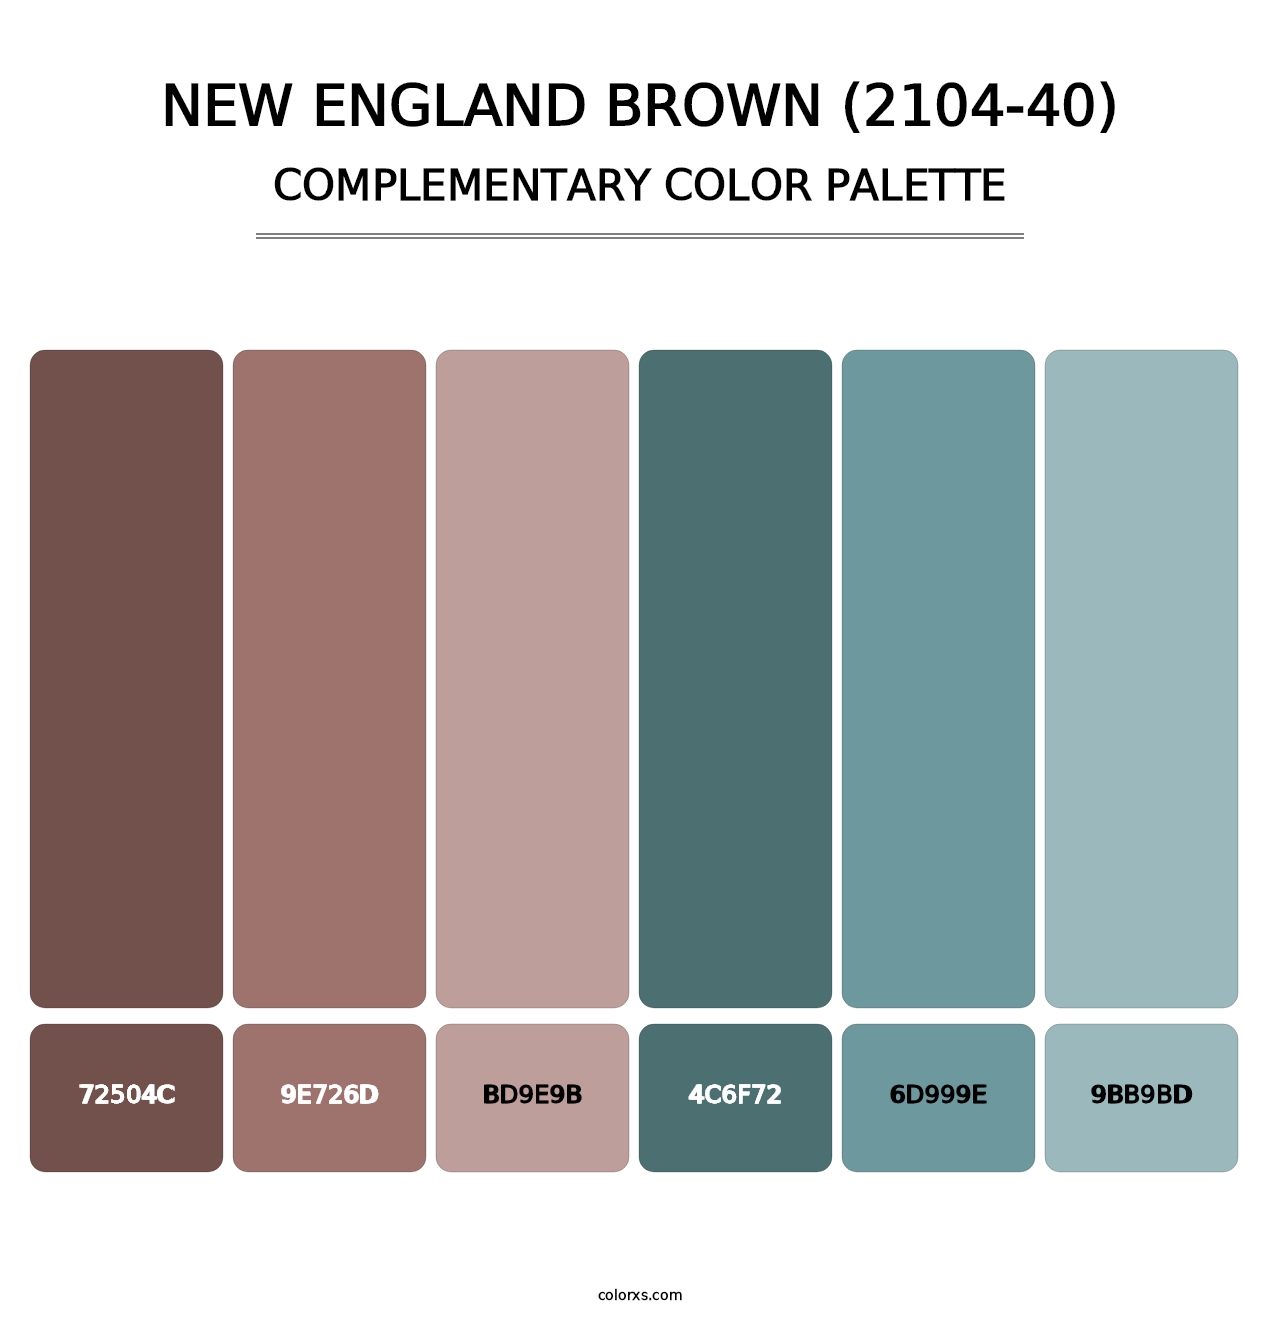 New England Brown (2104-40) - Complementary Color Palette